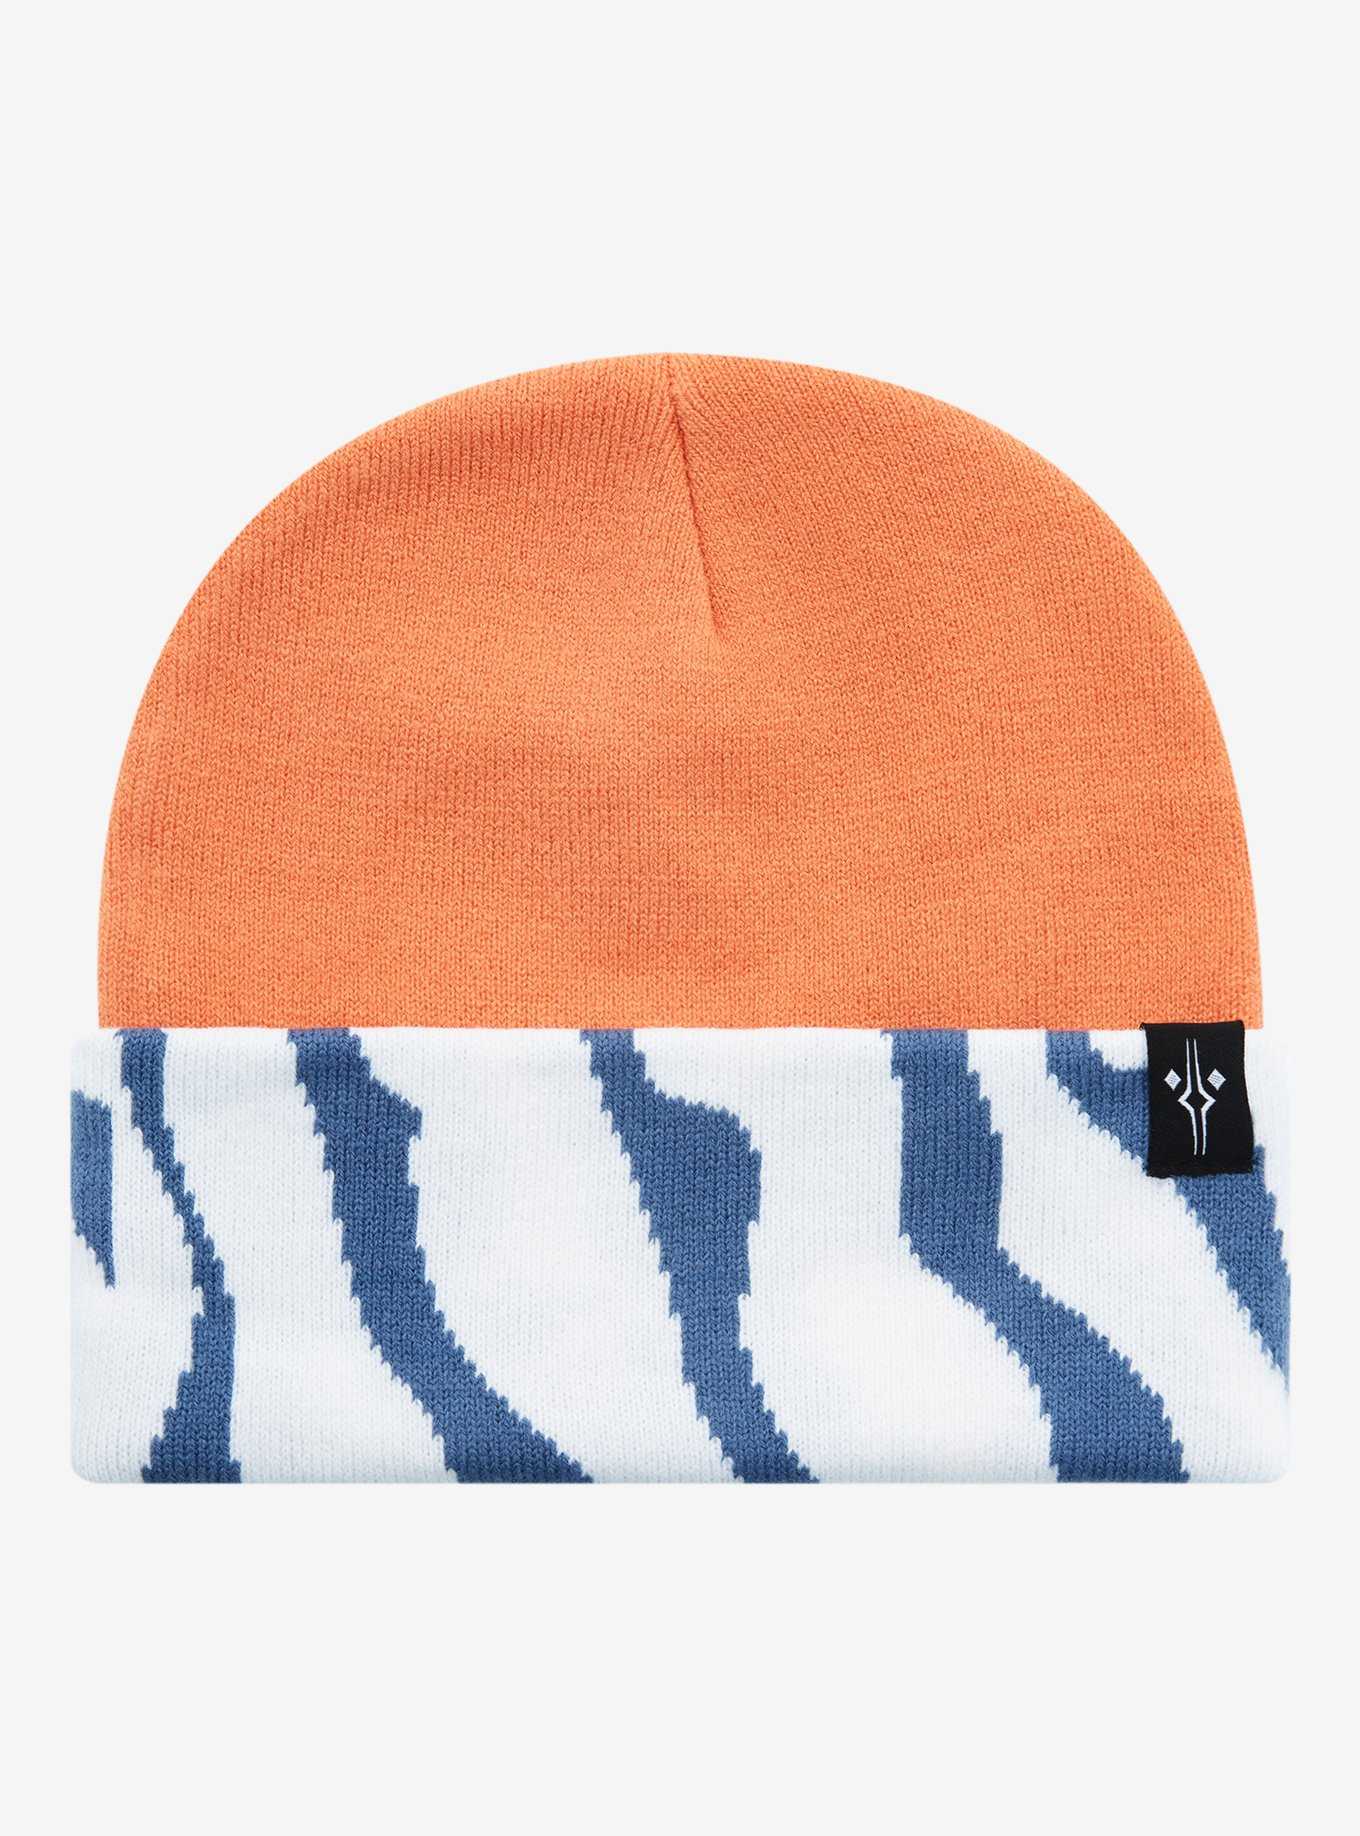 Cool Beanies: Slouchy, Trendy | Beanies Pop Culture & BoxLunch